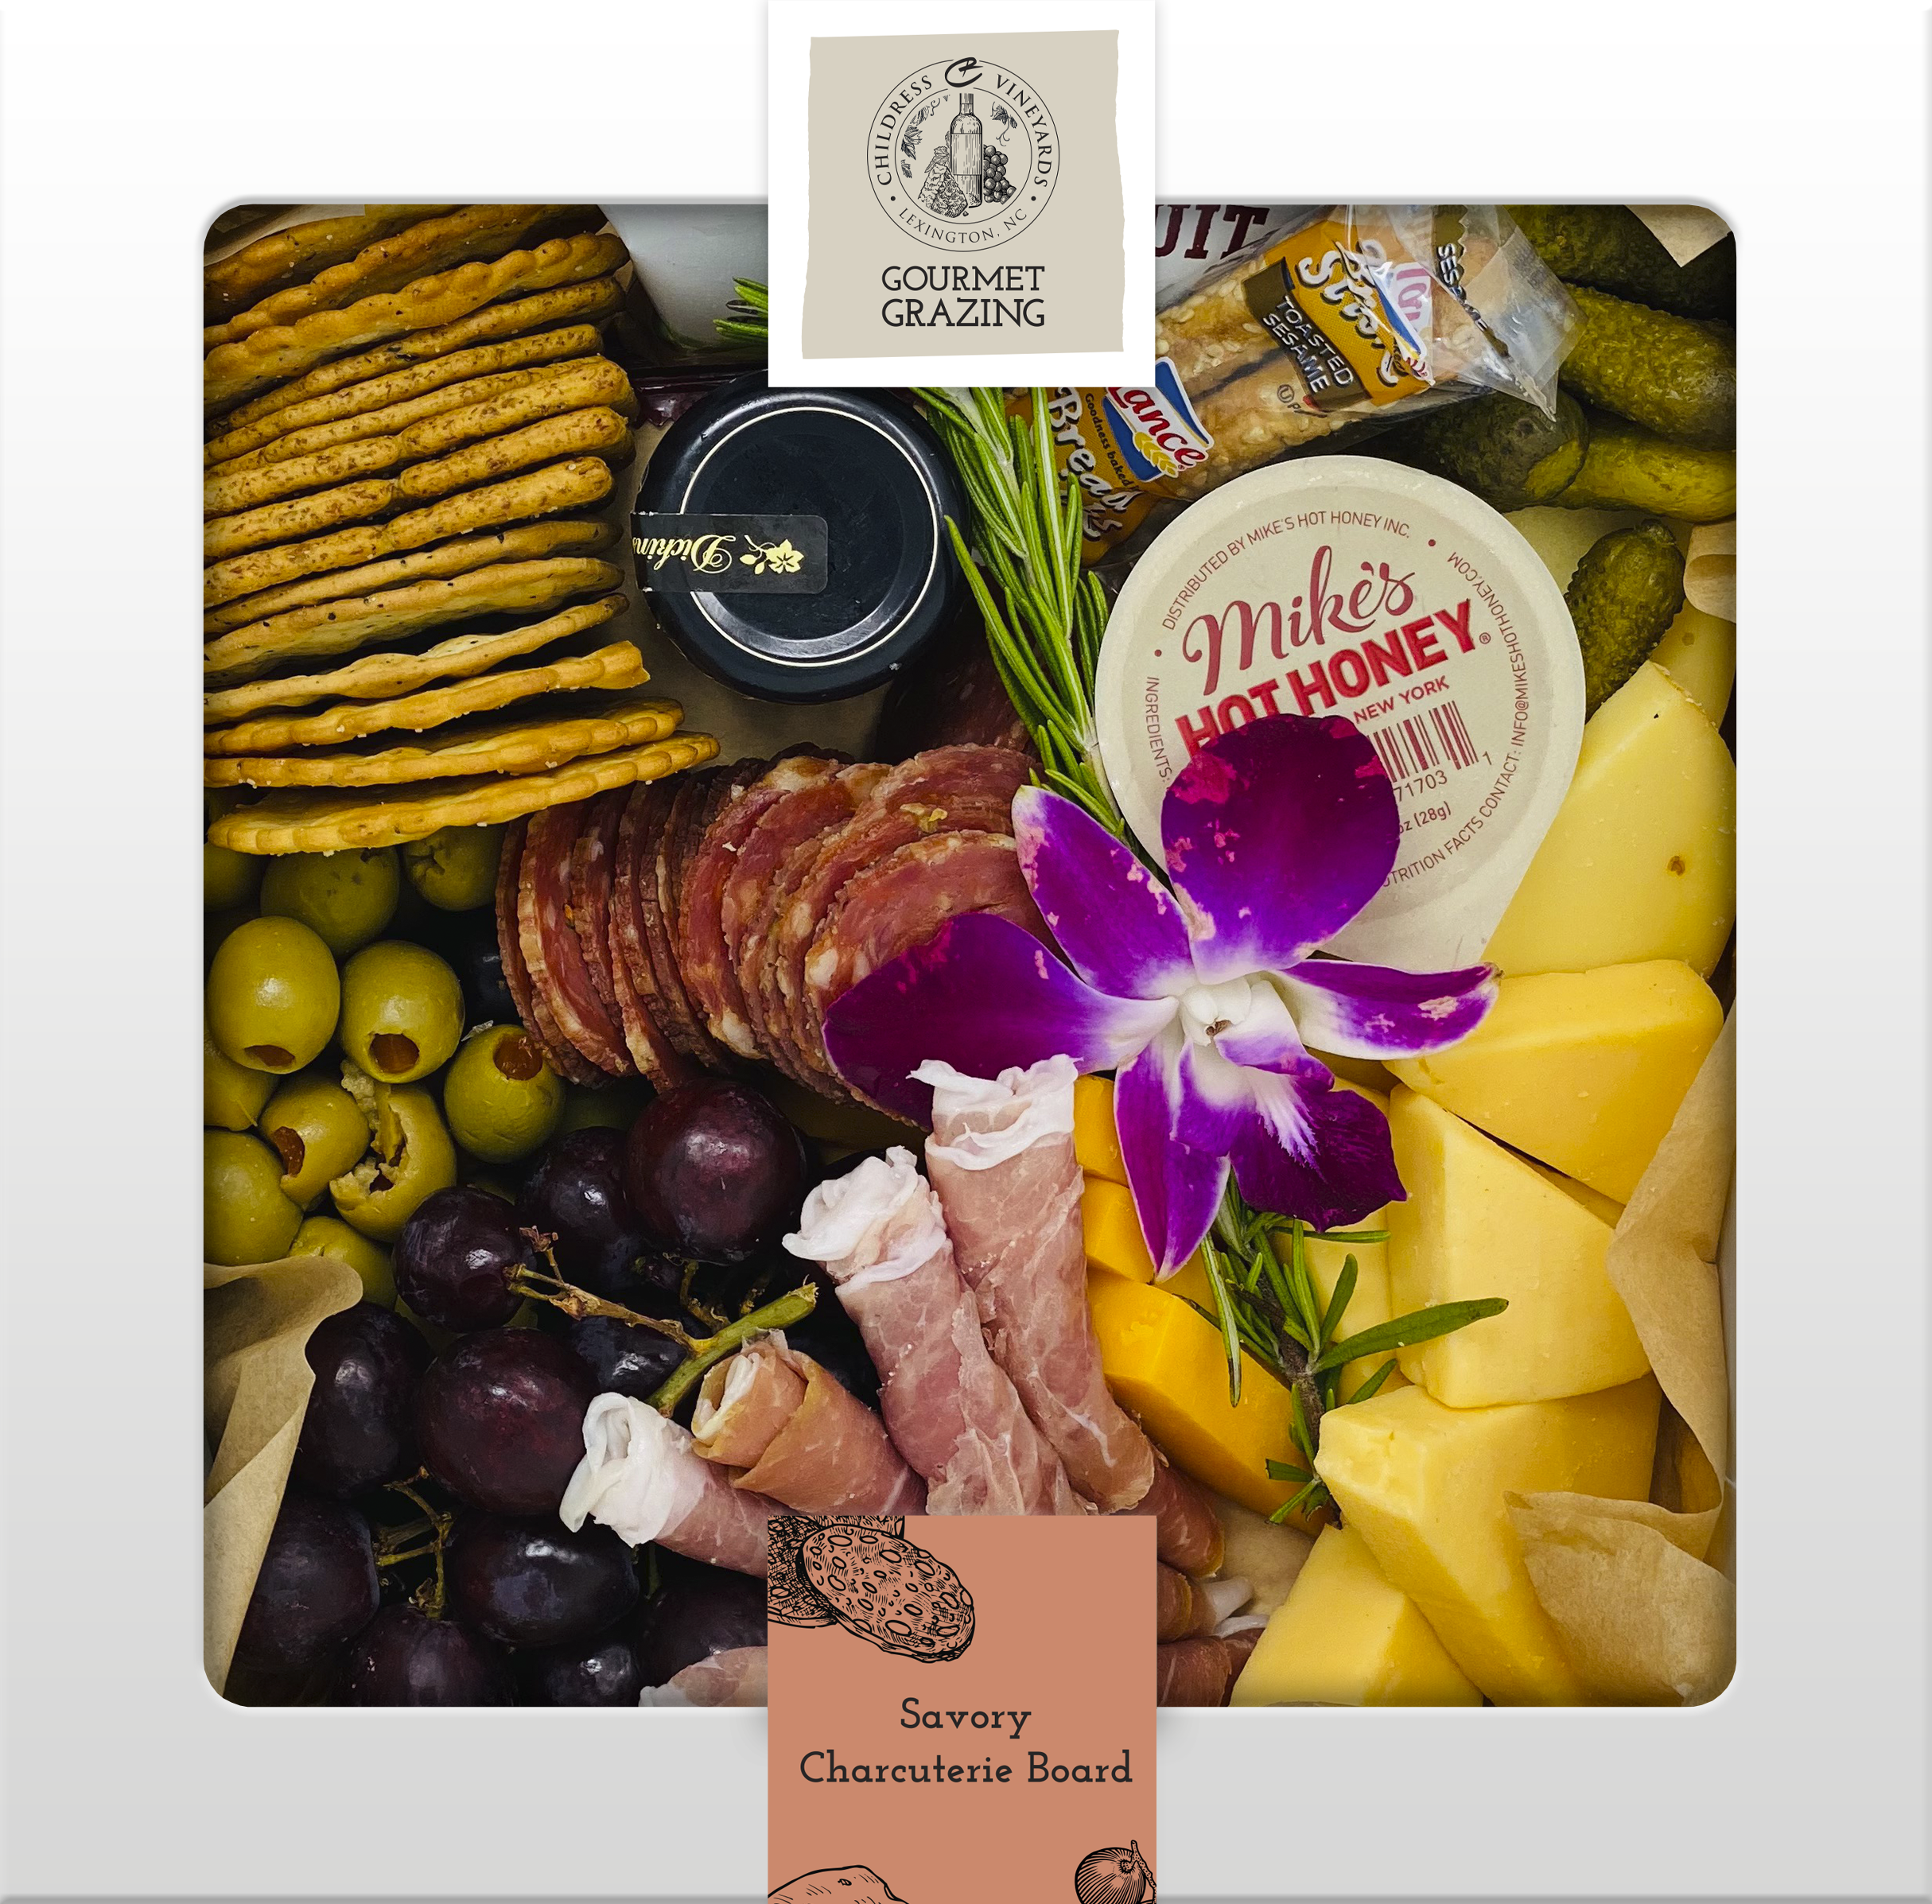 Childress Vineyards and Winery Gourmet Grazing Charcuterie Boxes